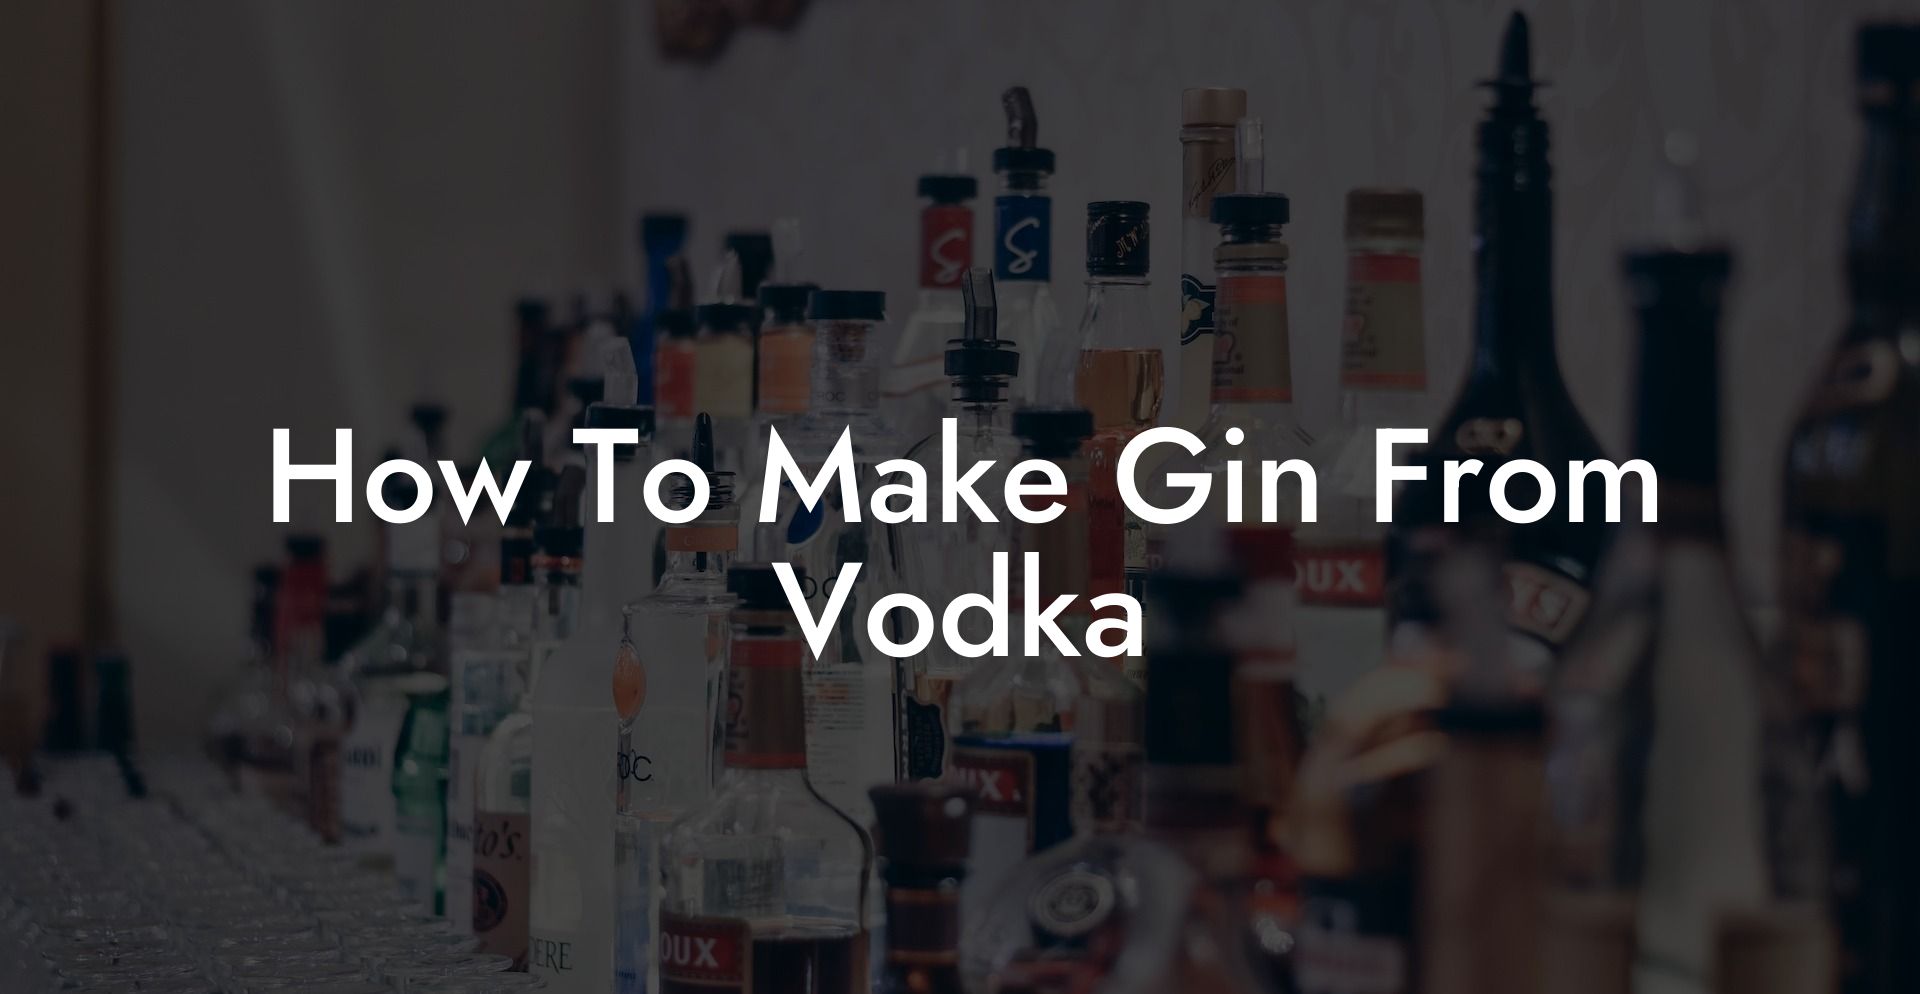 How To Make Gin From Vodka